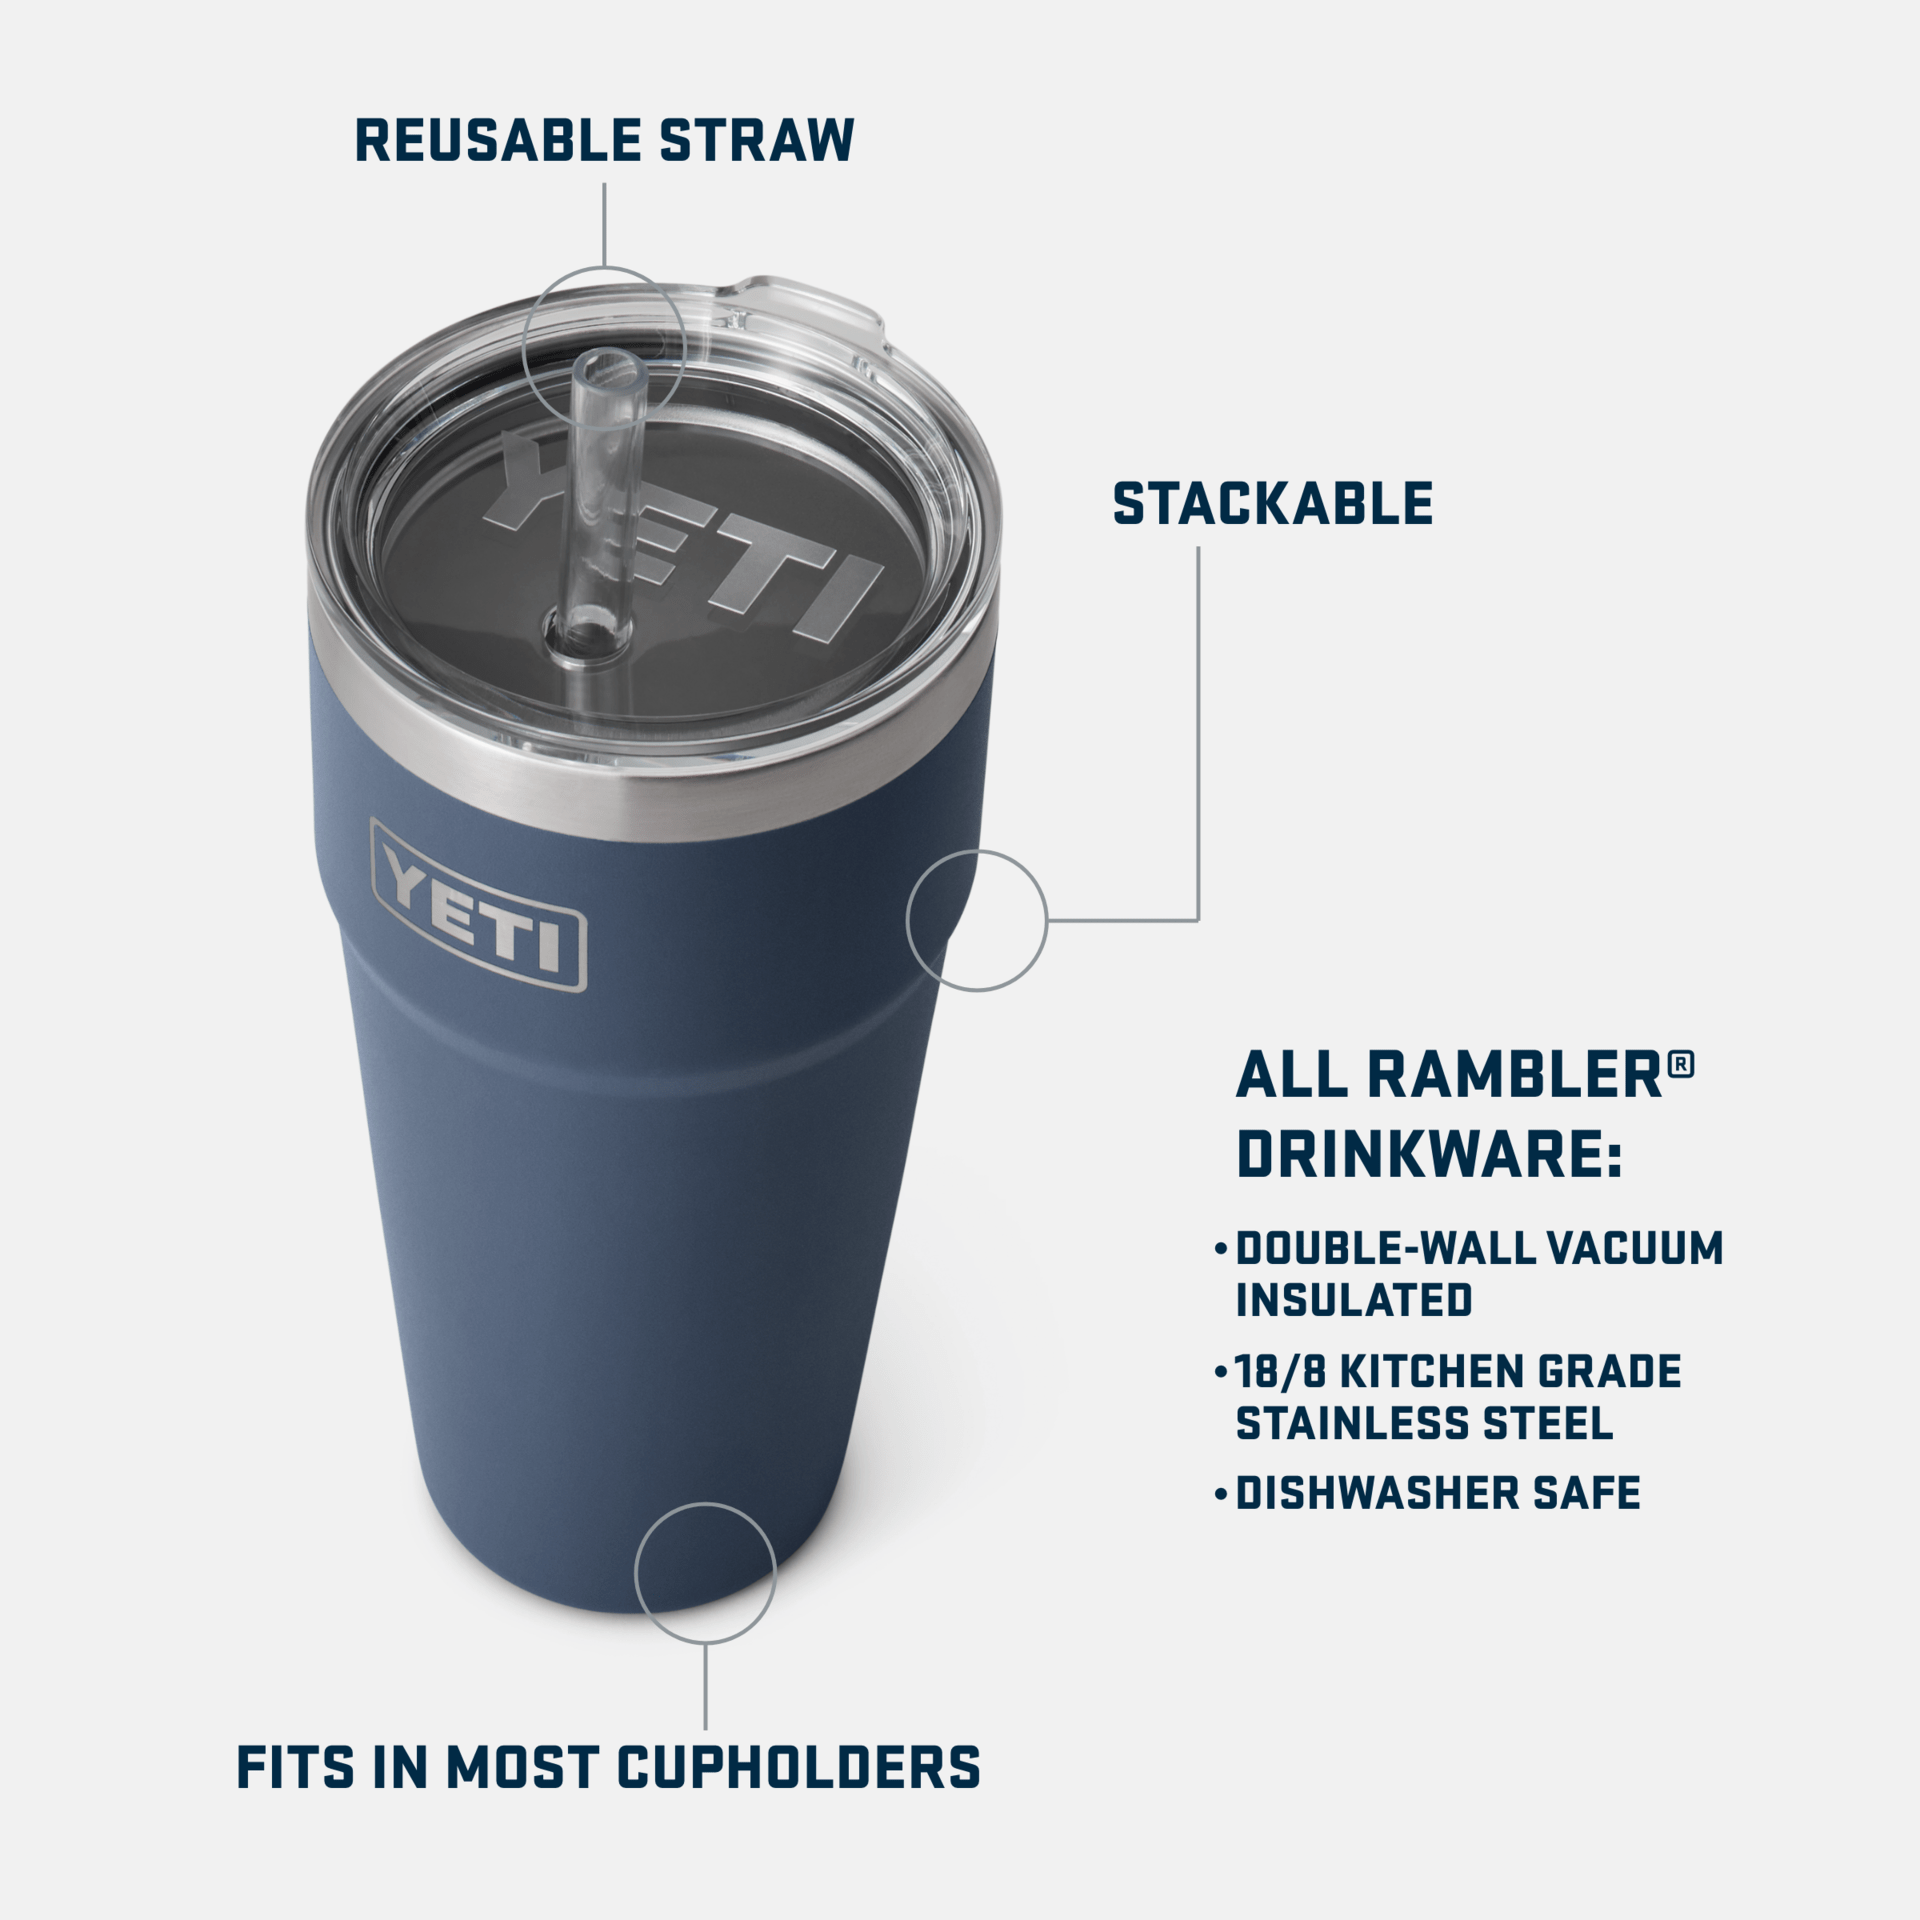 Yeti Rambler 26oz Stackable Cup With Straw Lid - Seafoam